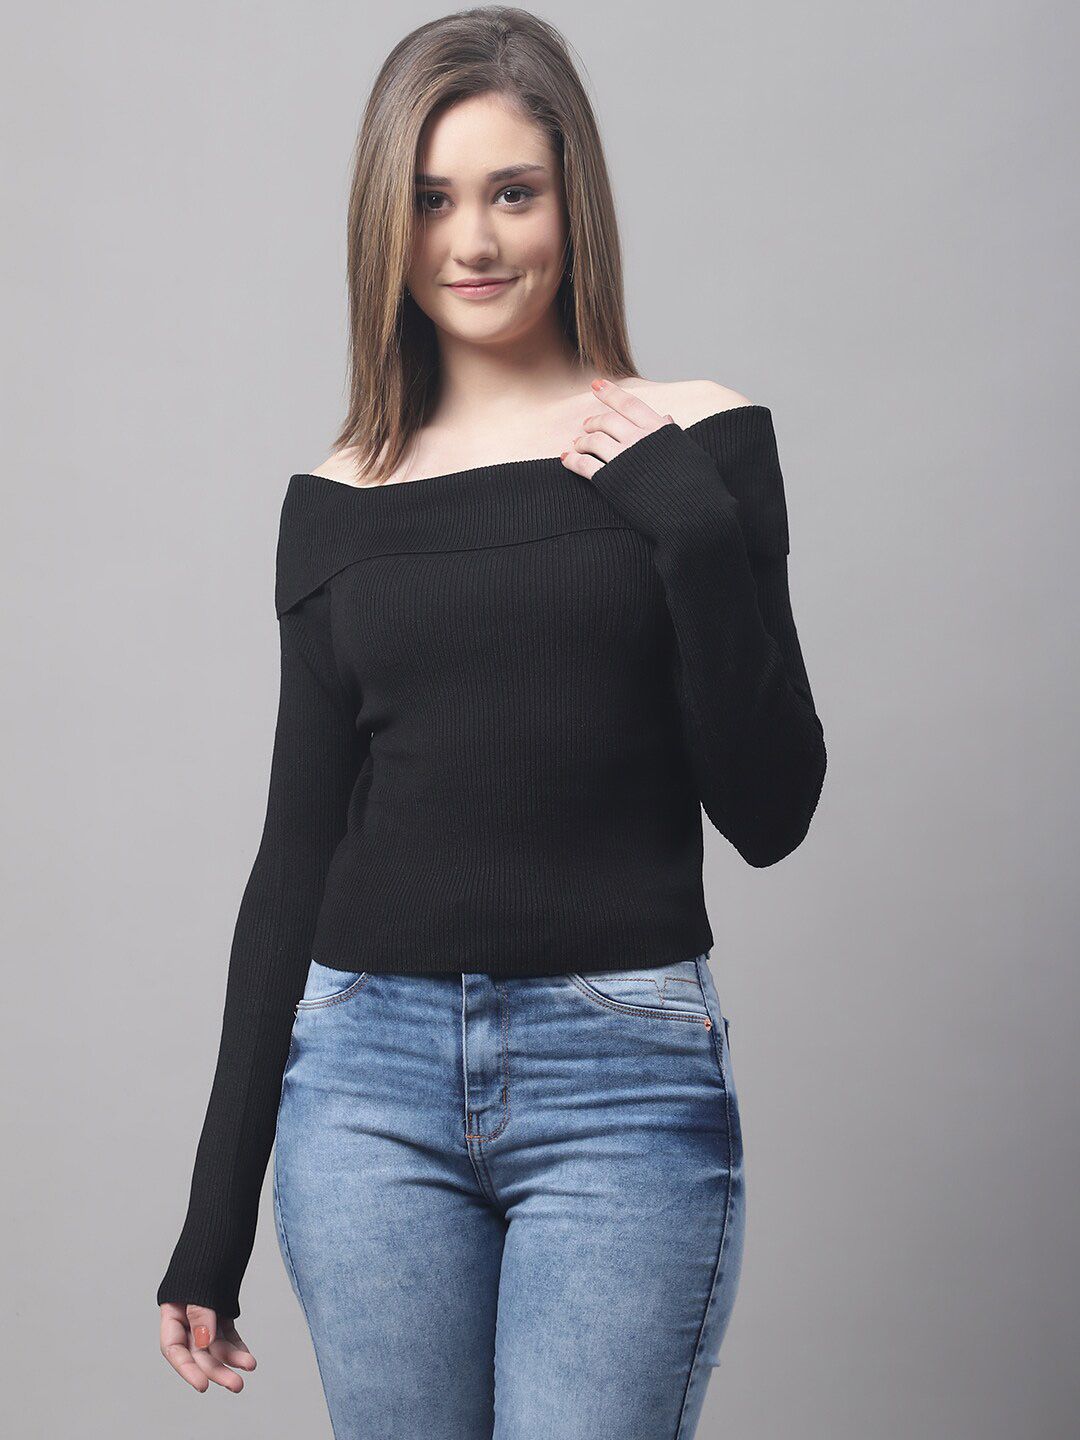 NoBarr Off-Shoulder Long Sleeves Acrylic Top Price in India